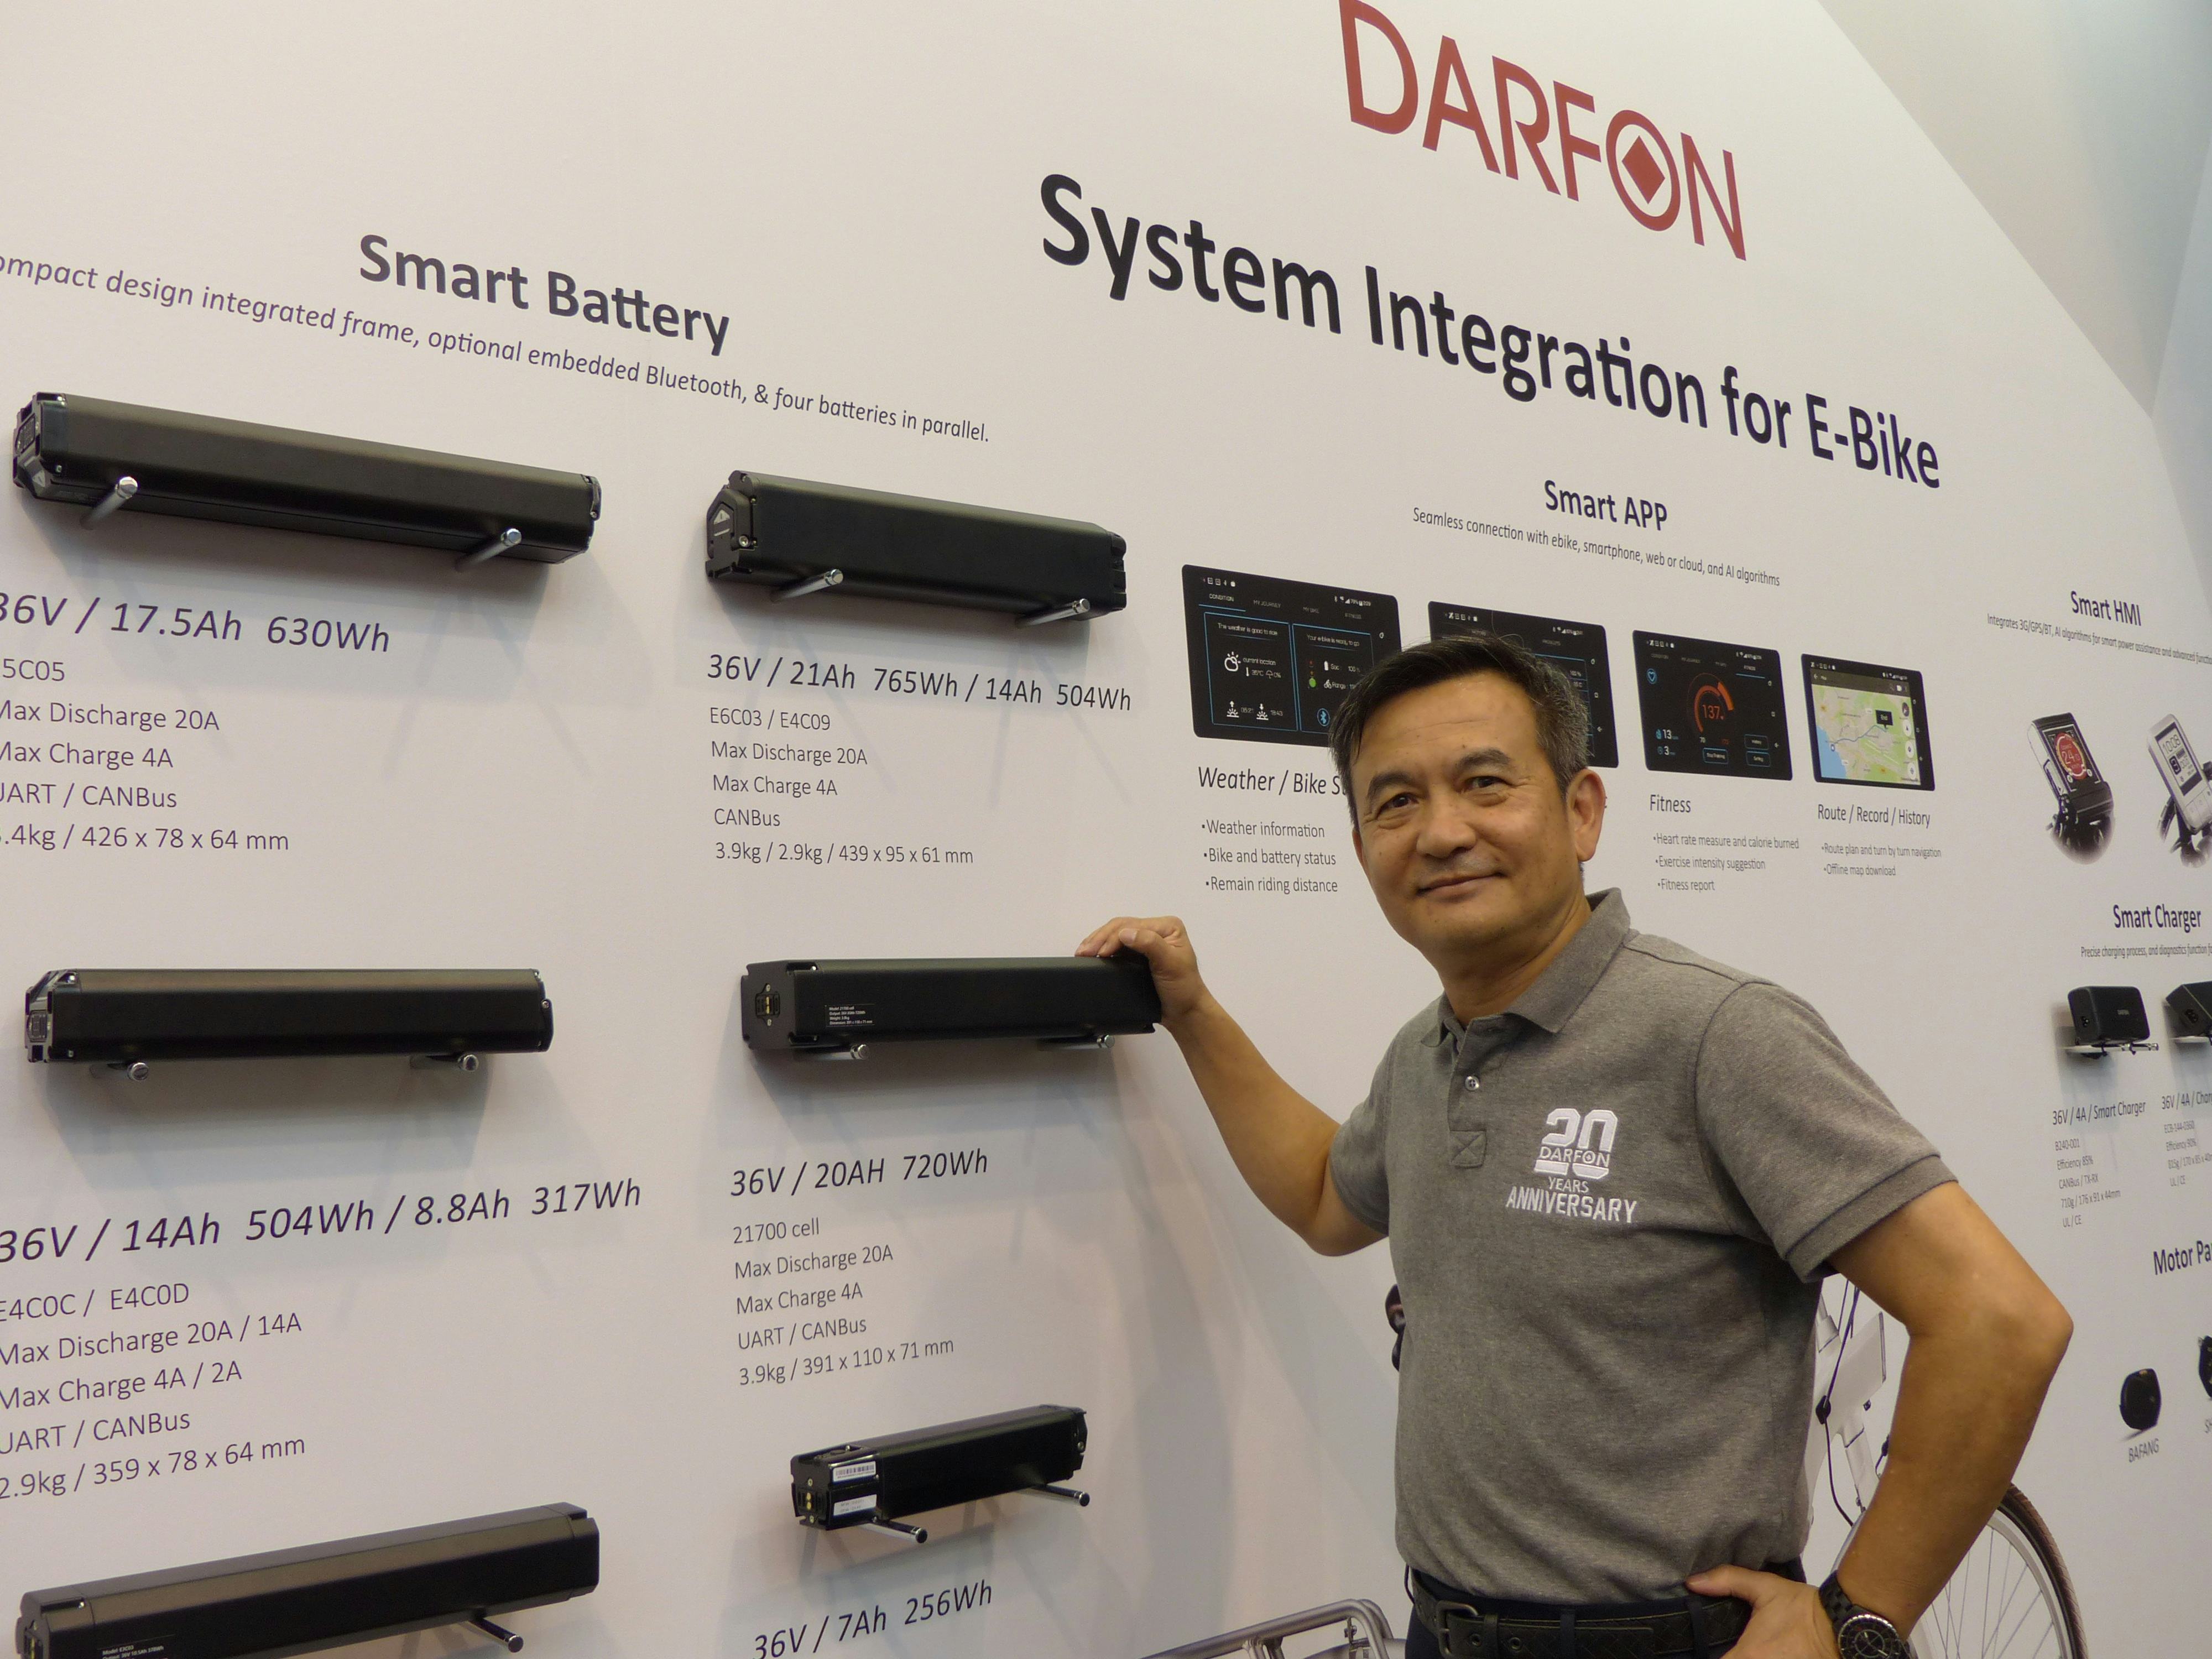 Darfon CEO Andy Su showing the company’s battery range with 360Wh batteries for e-road bikes, 417Wh and 504Wh batteries for e-city/e-trekking bikes and 720Wh batteries for e-MTBs. – Photo Bike Europe